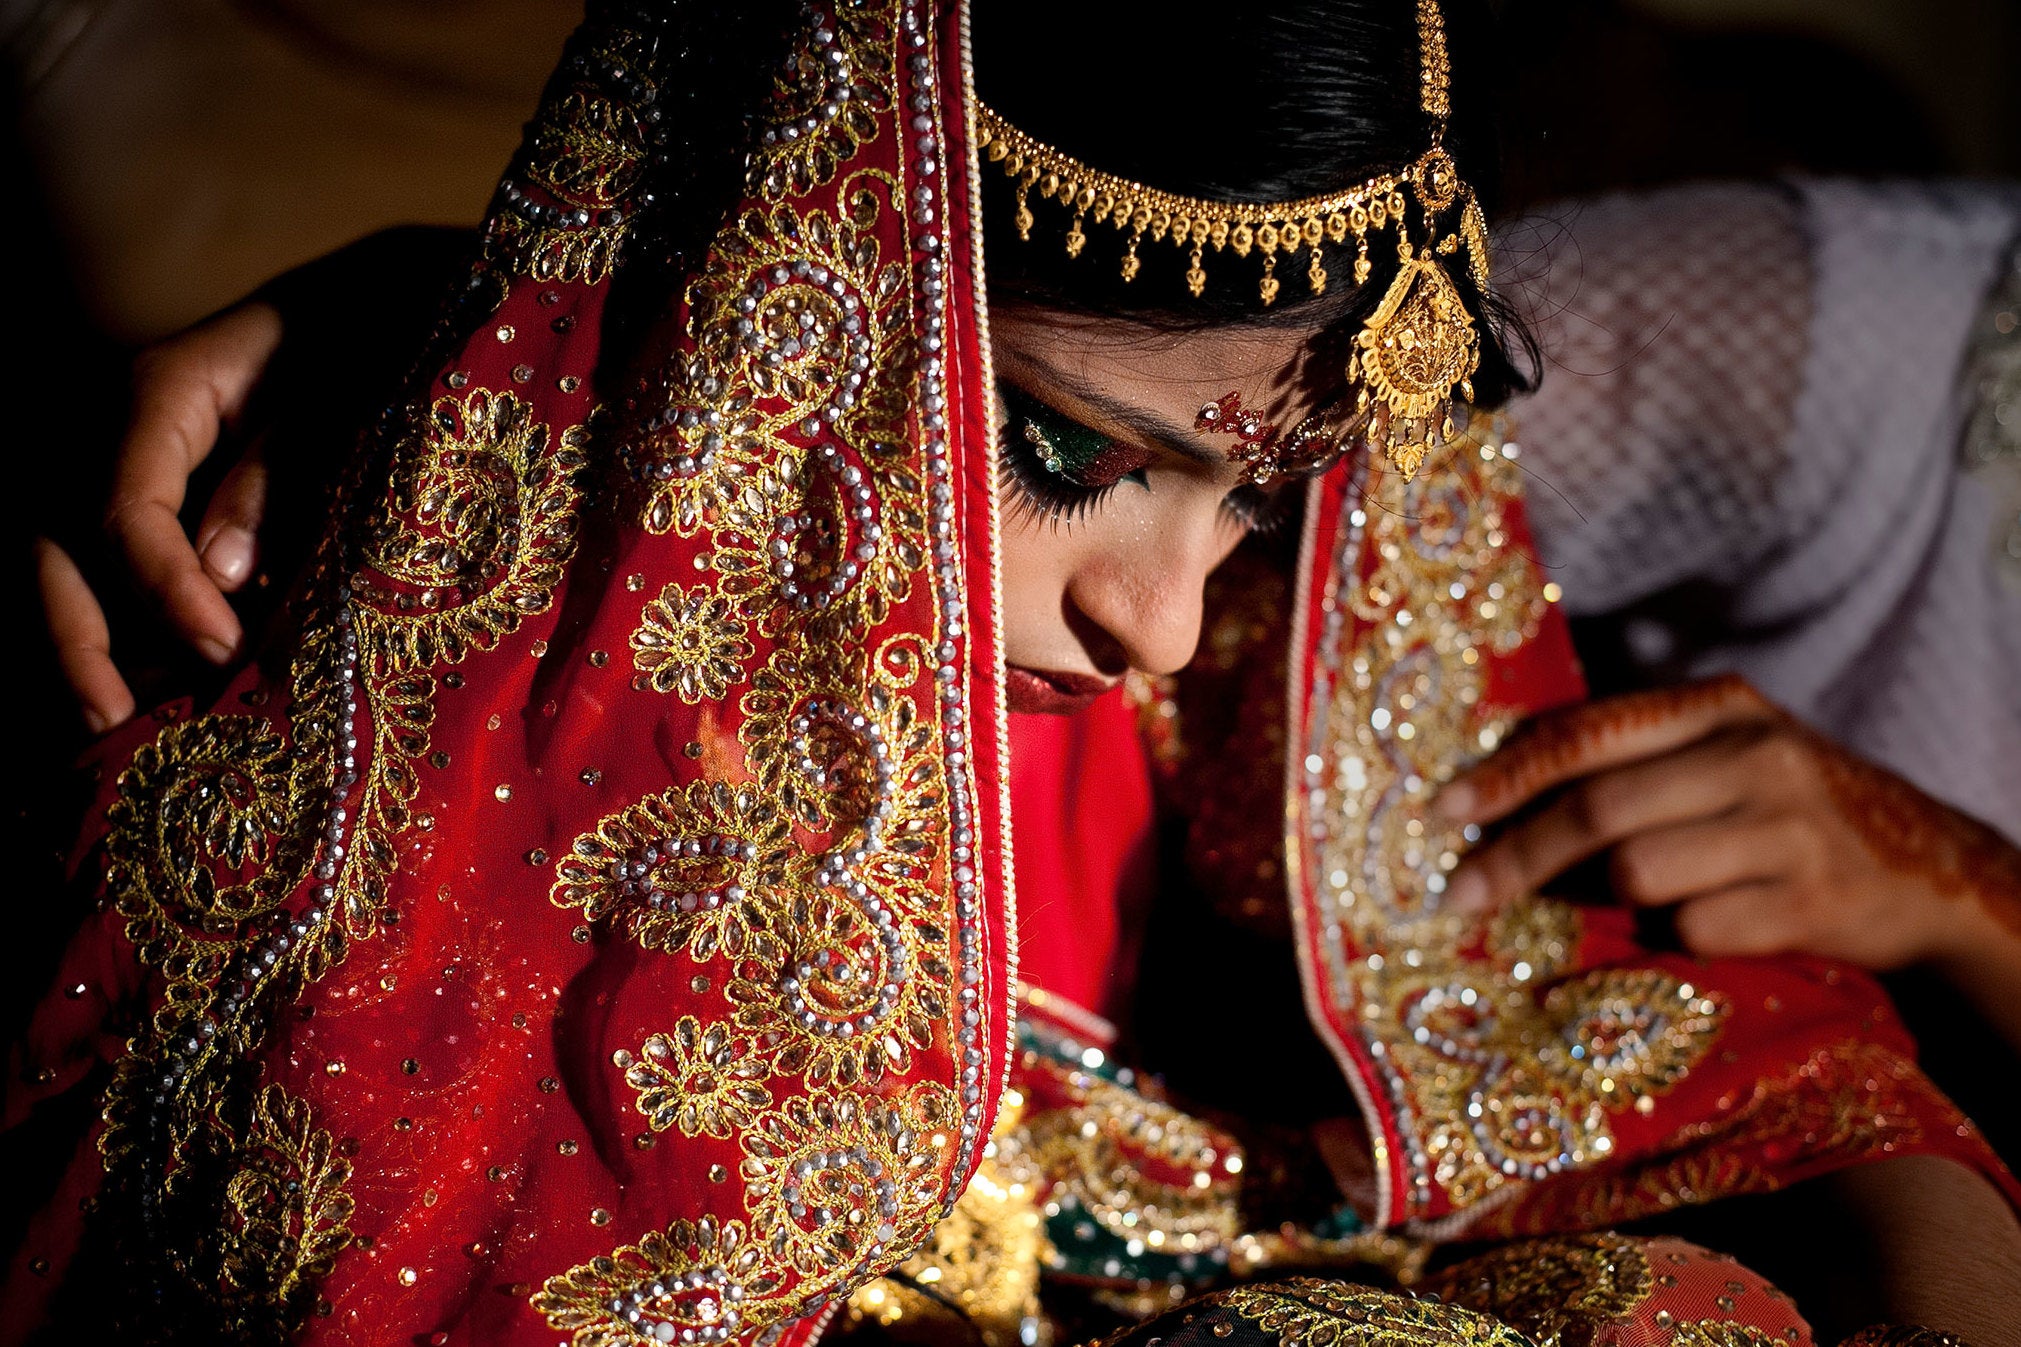 Bangladesh child marriage New law will reduce minimum marital age to zero The Independent The Independent photo